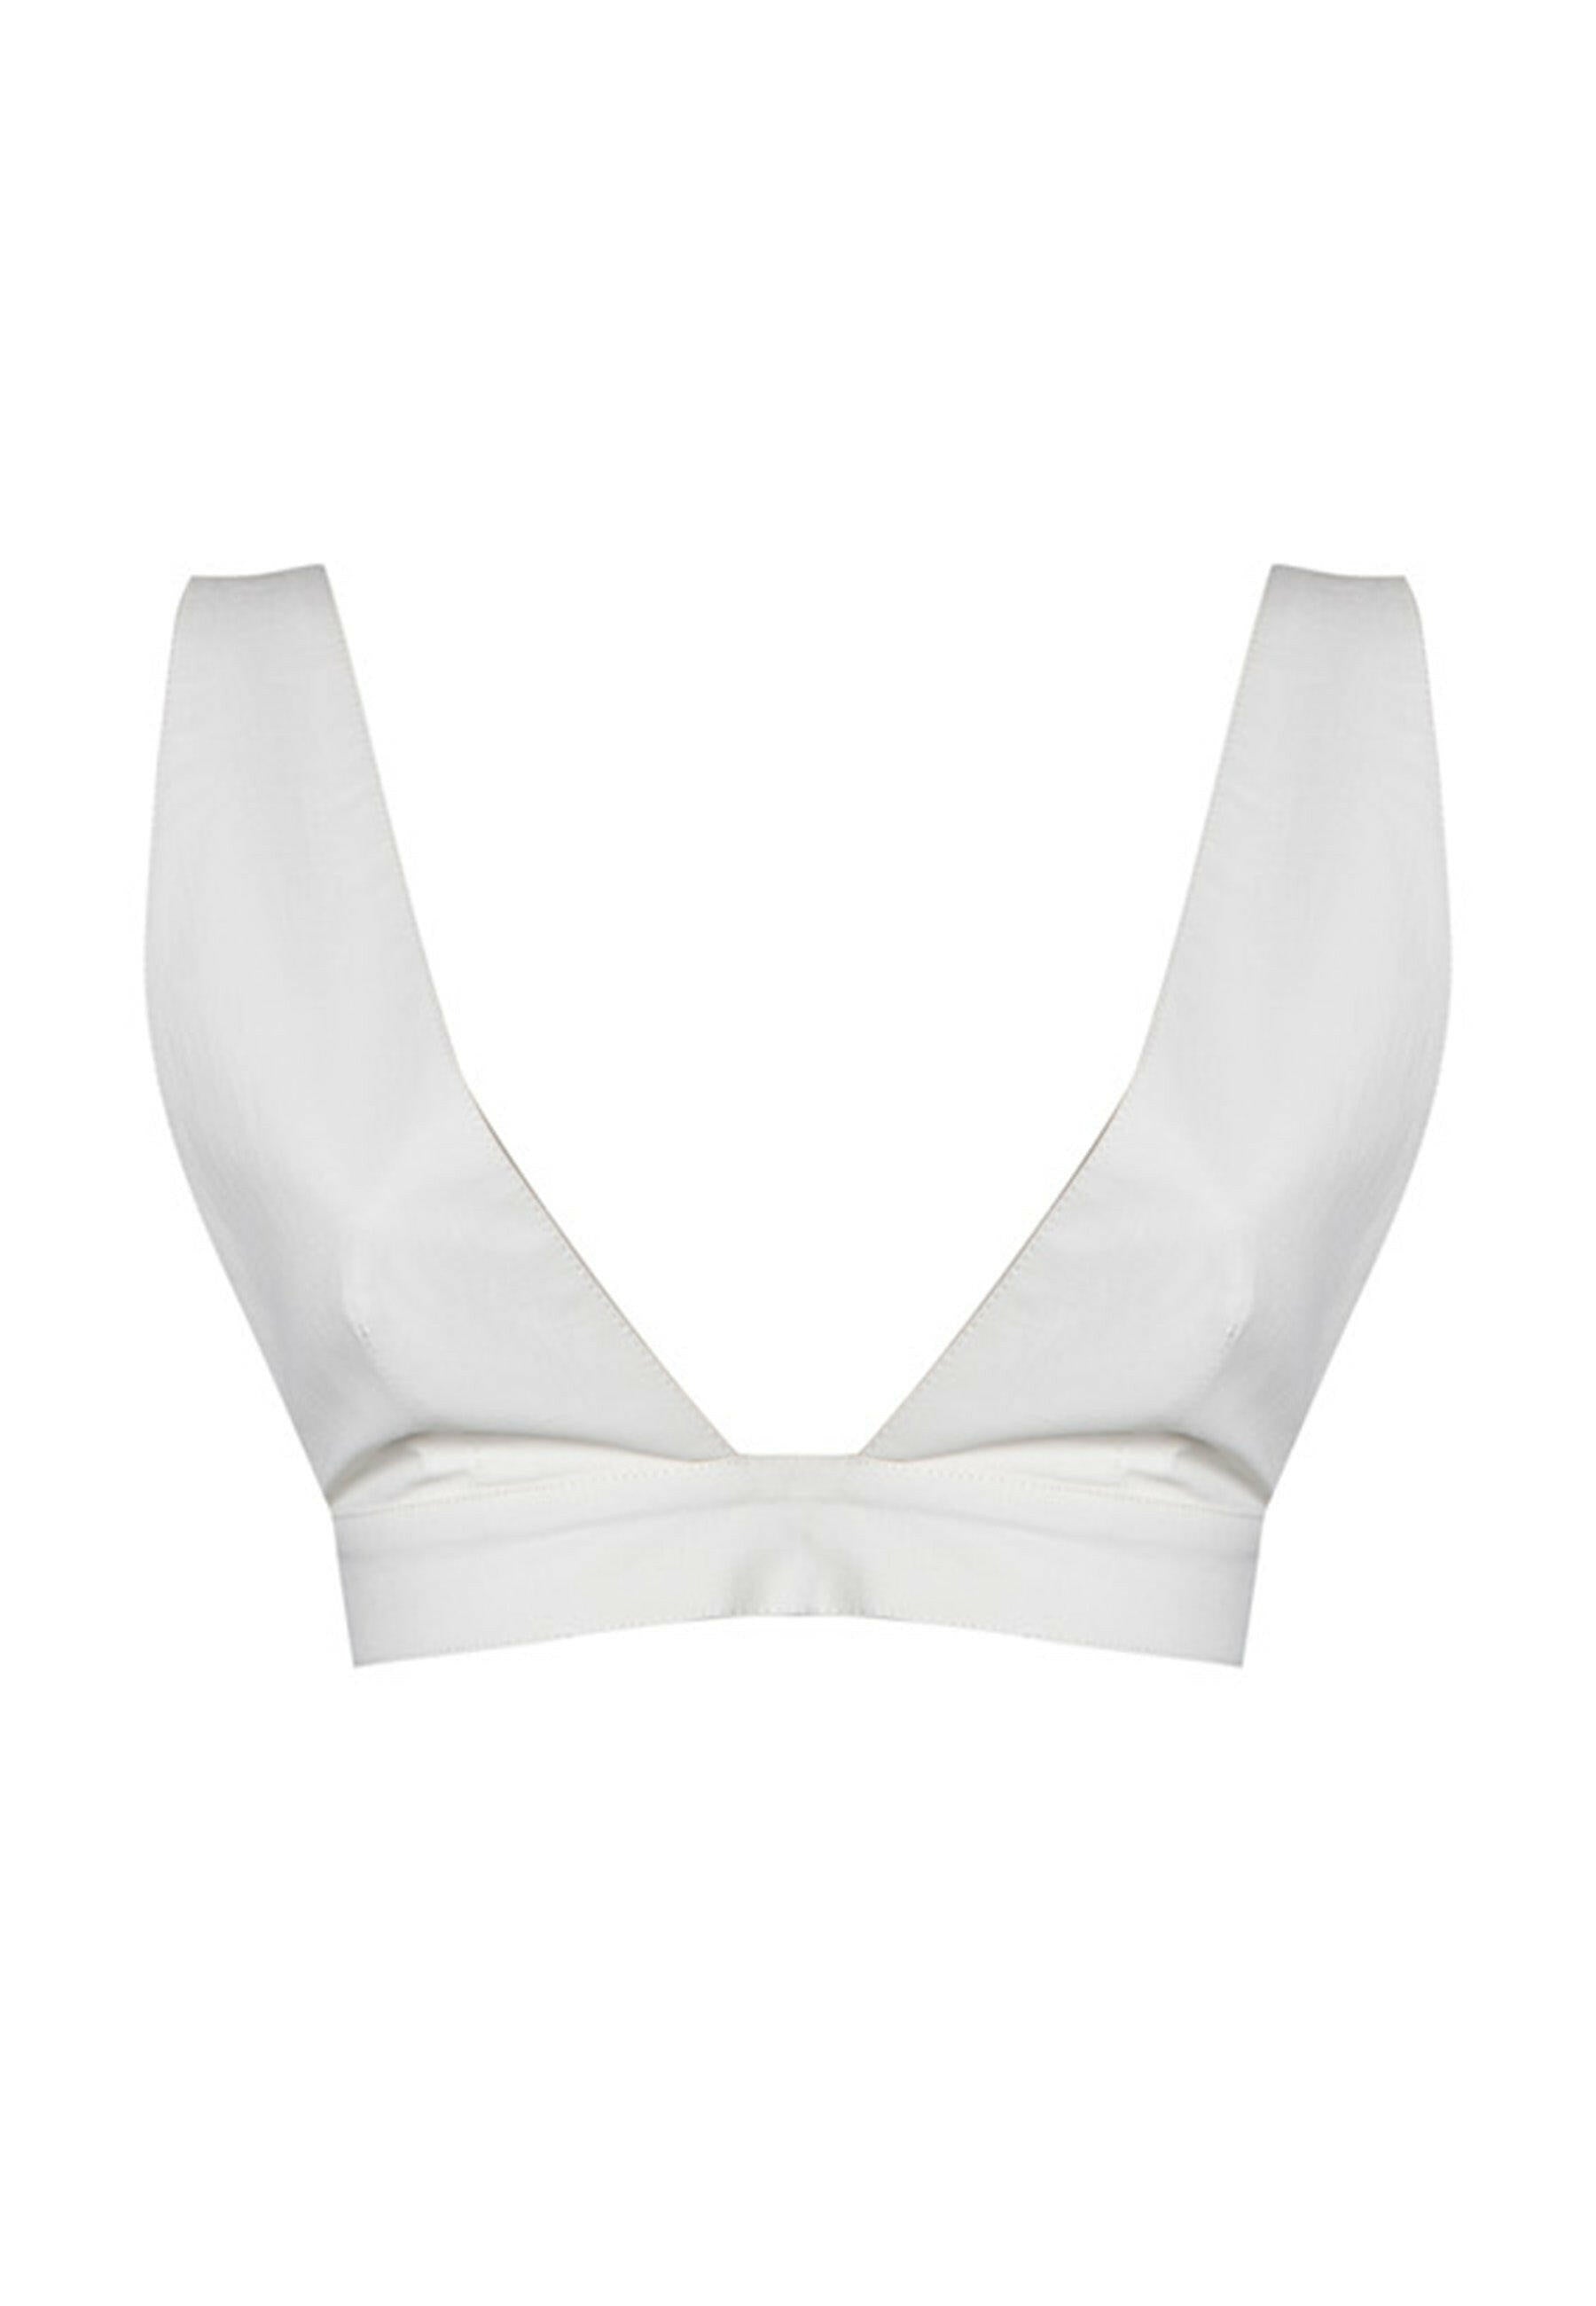 Women's white cotton blend crop top with back buttons